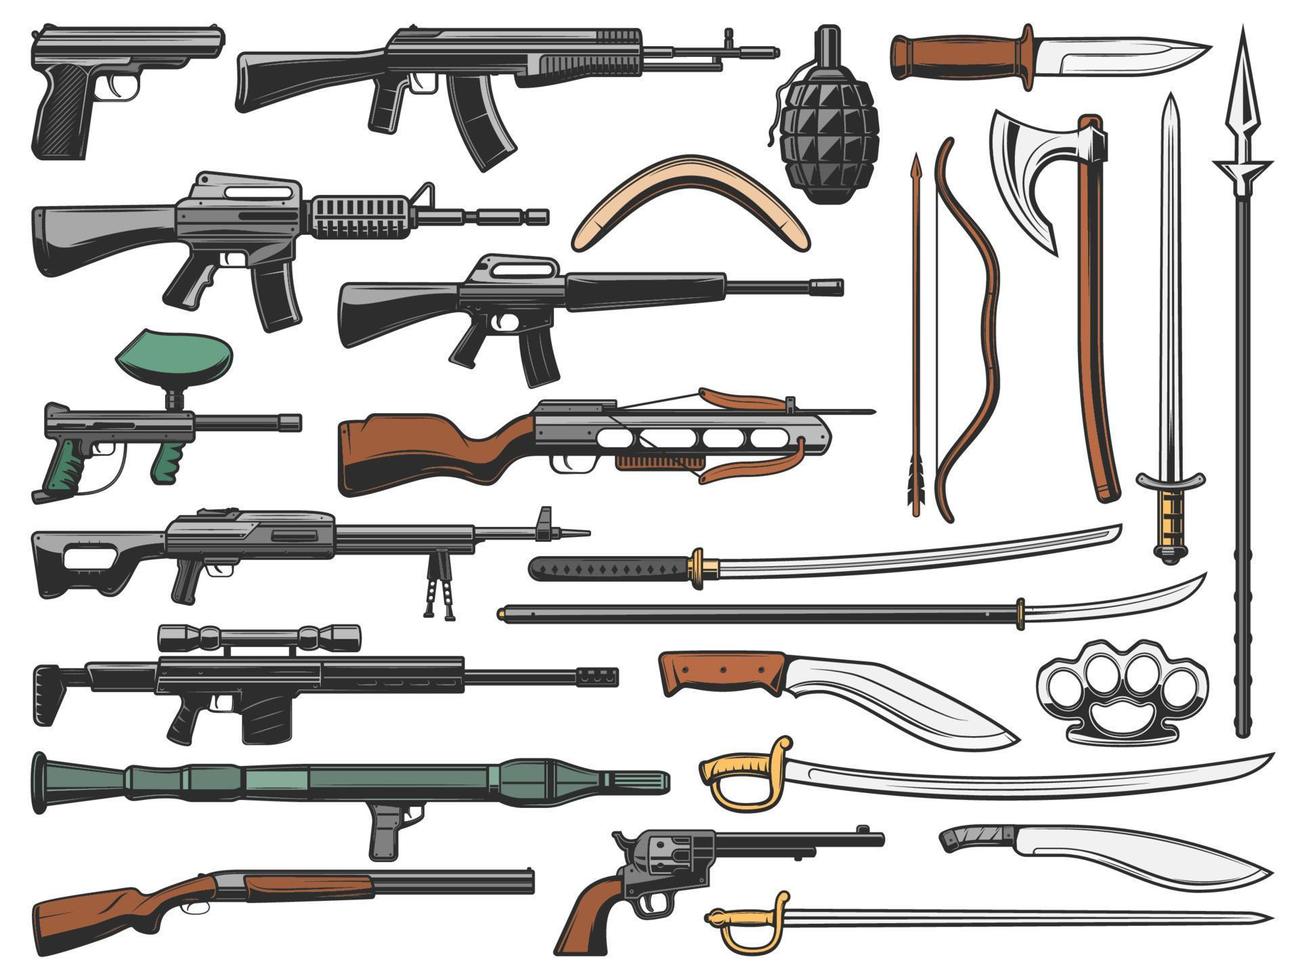 Weapon, military ammunition and shotguns icons vector